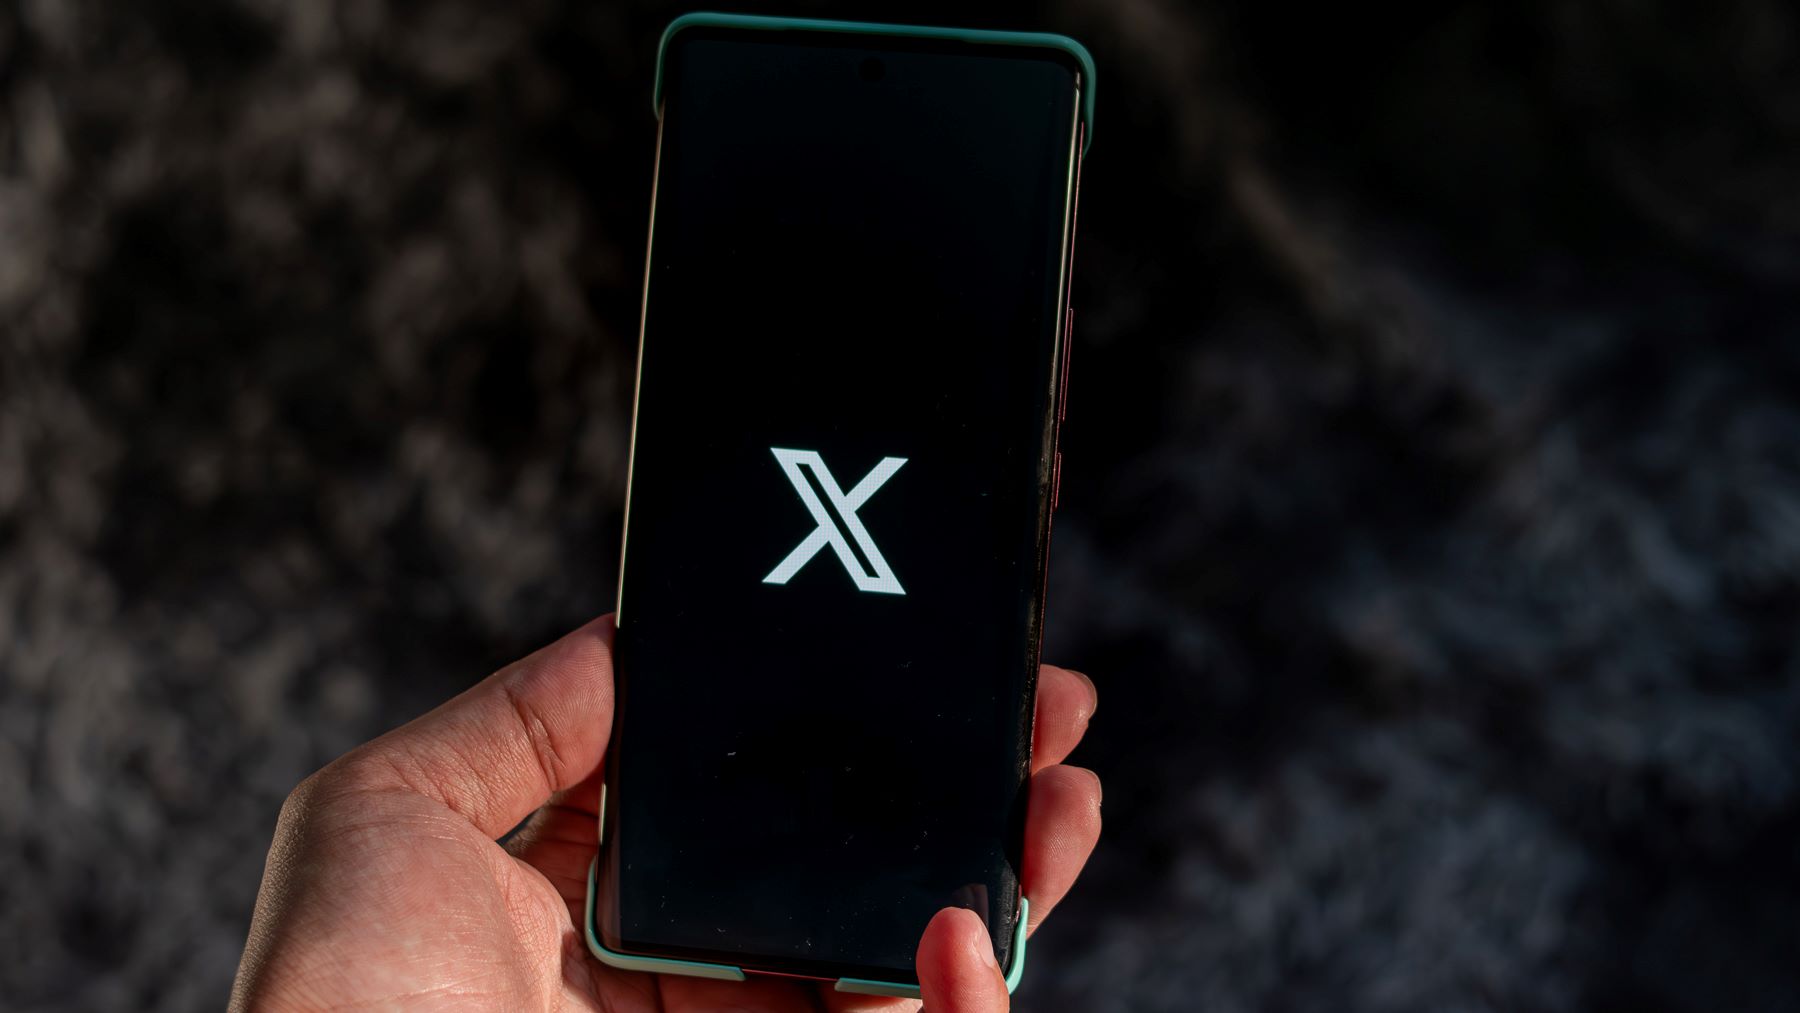 X Implements Payment, Phone, And ID Verification To Stop Bots, Alongside New $1/yr Fee